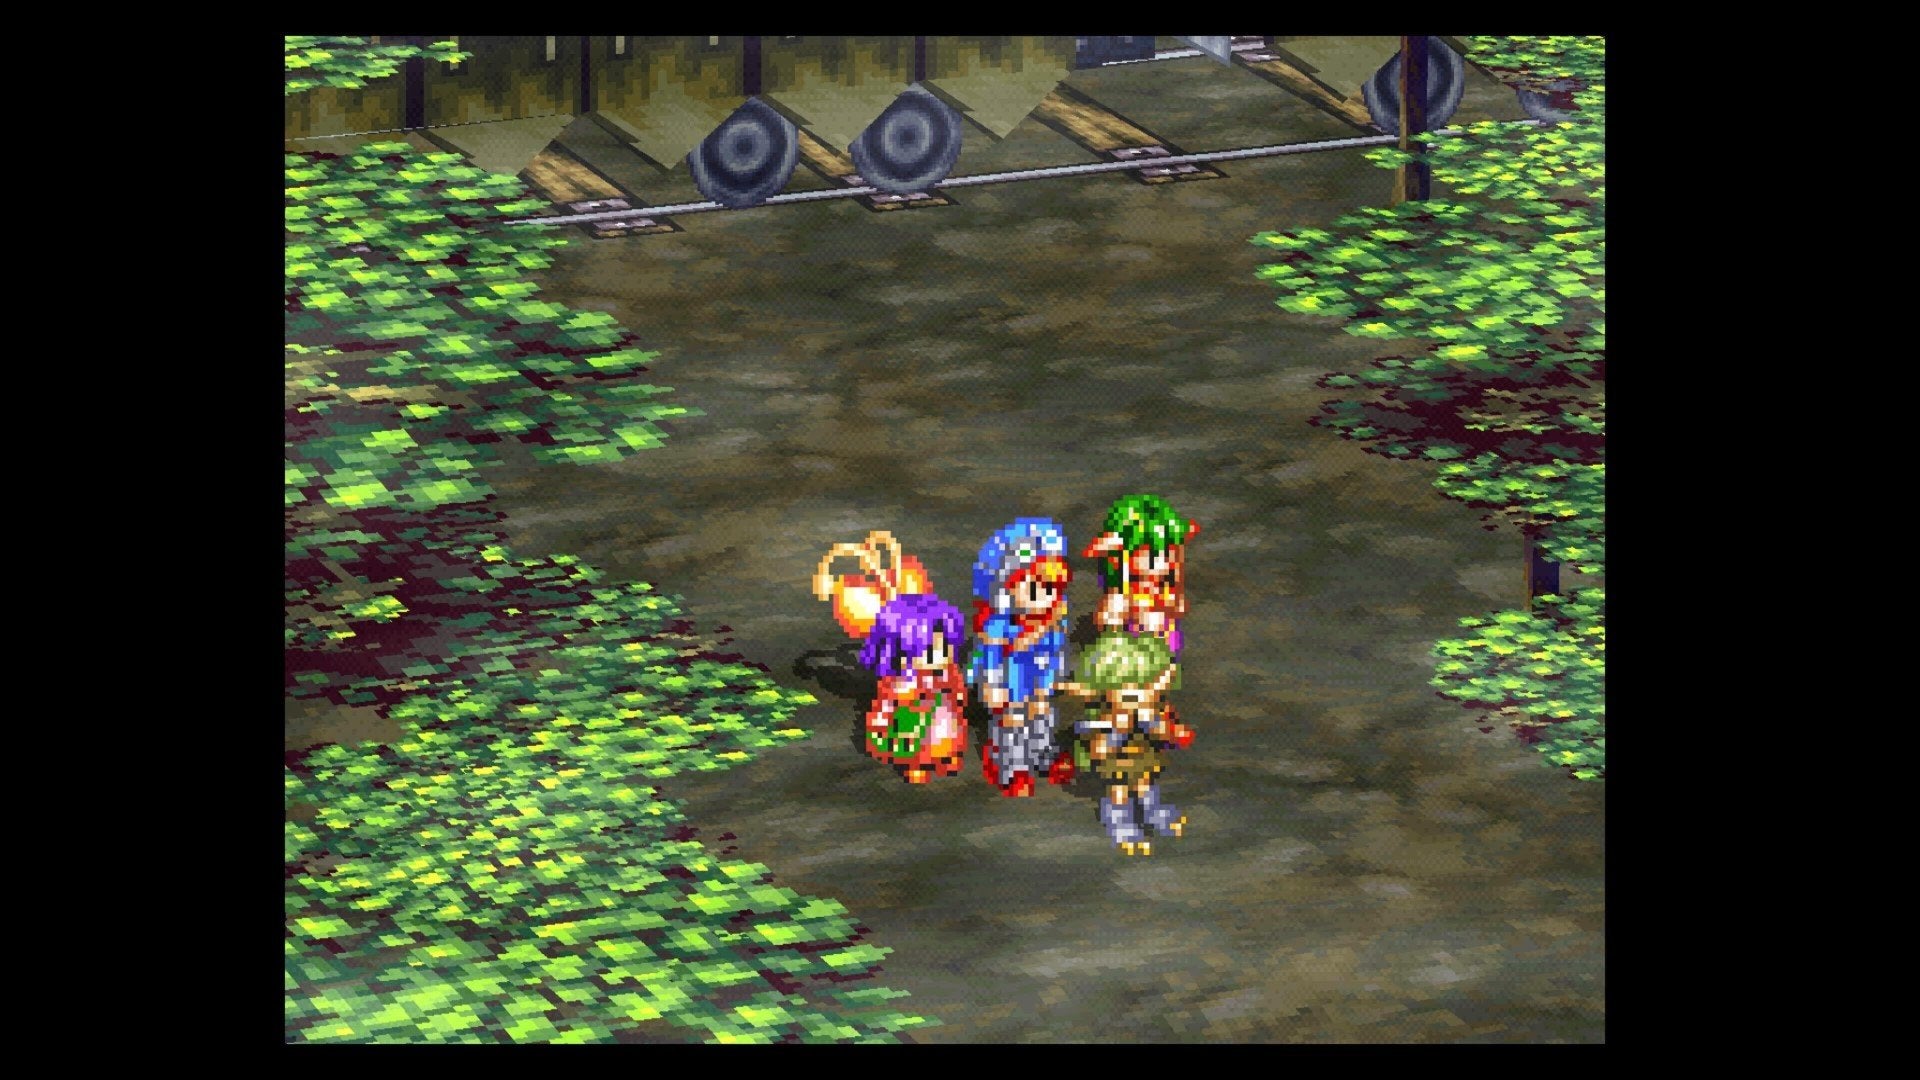 West Misty Forest in Grandia.